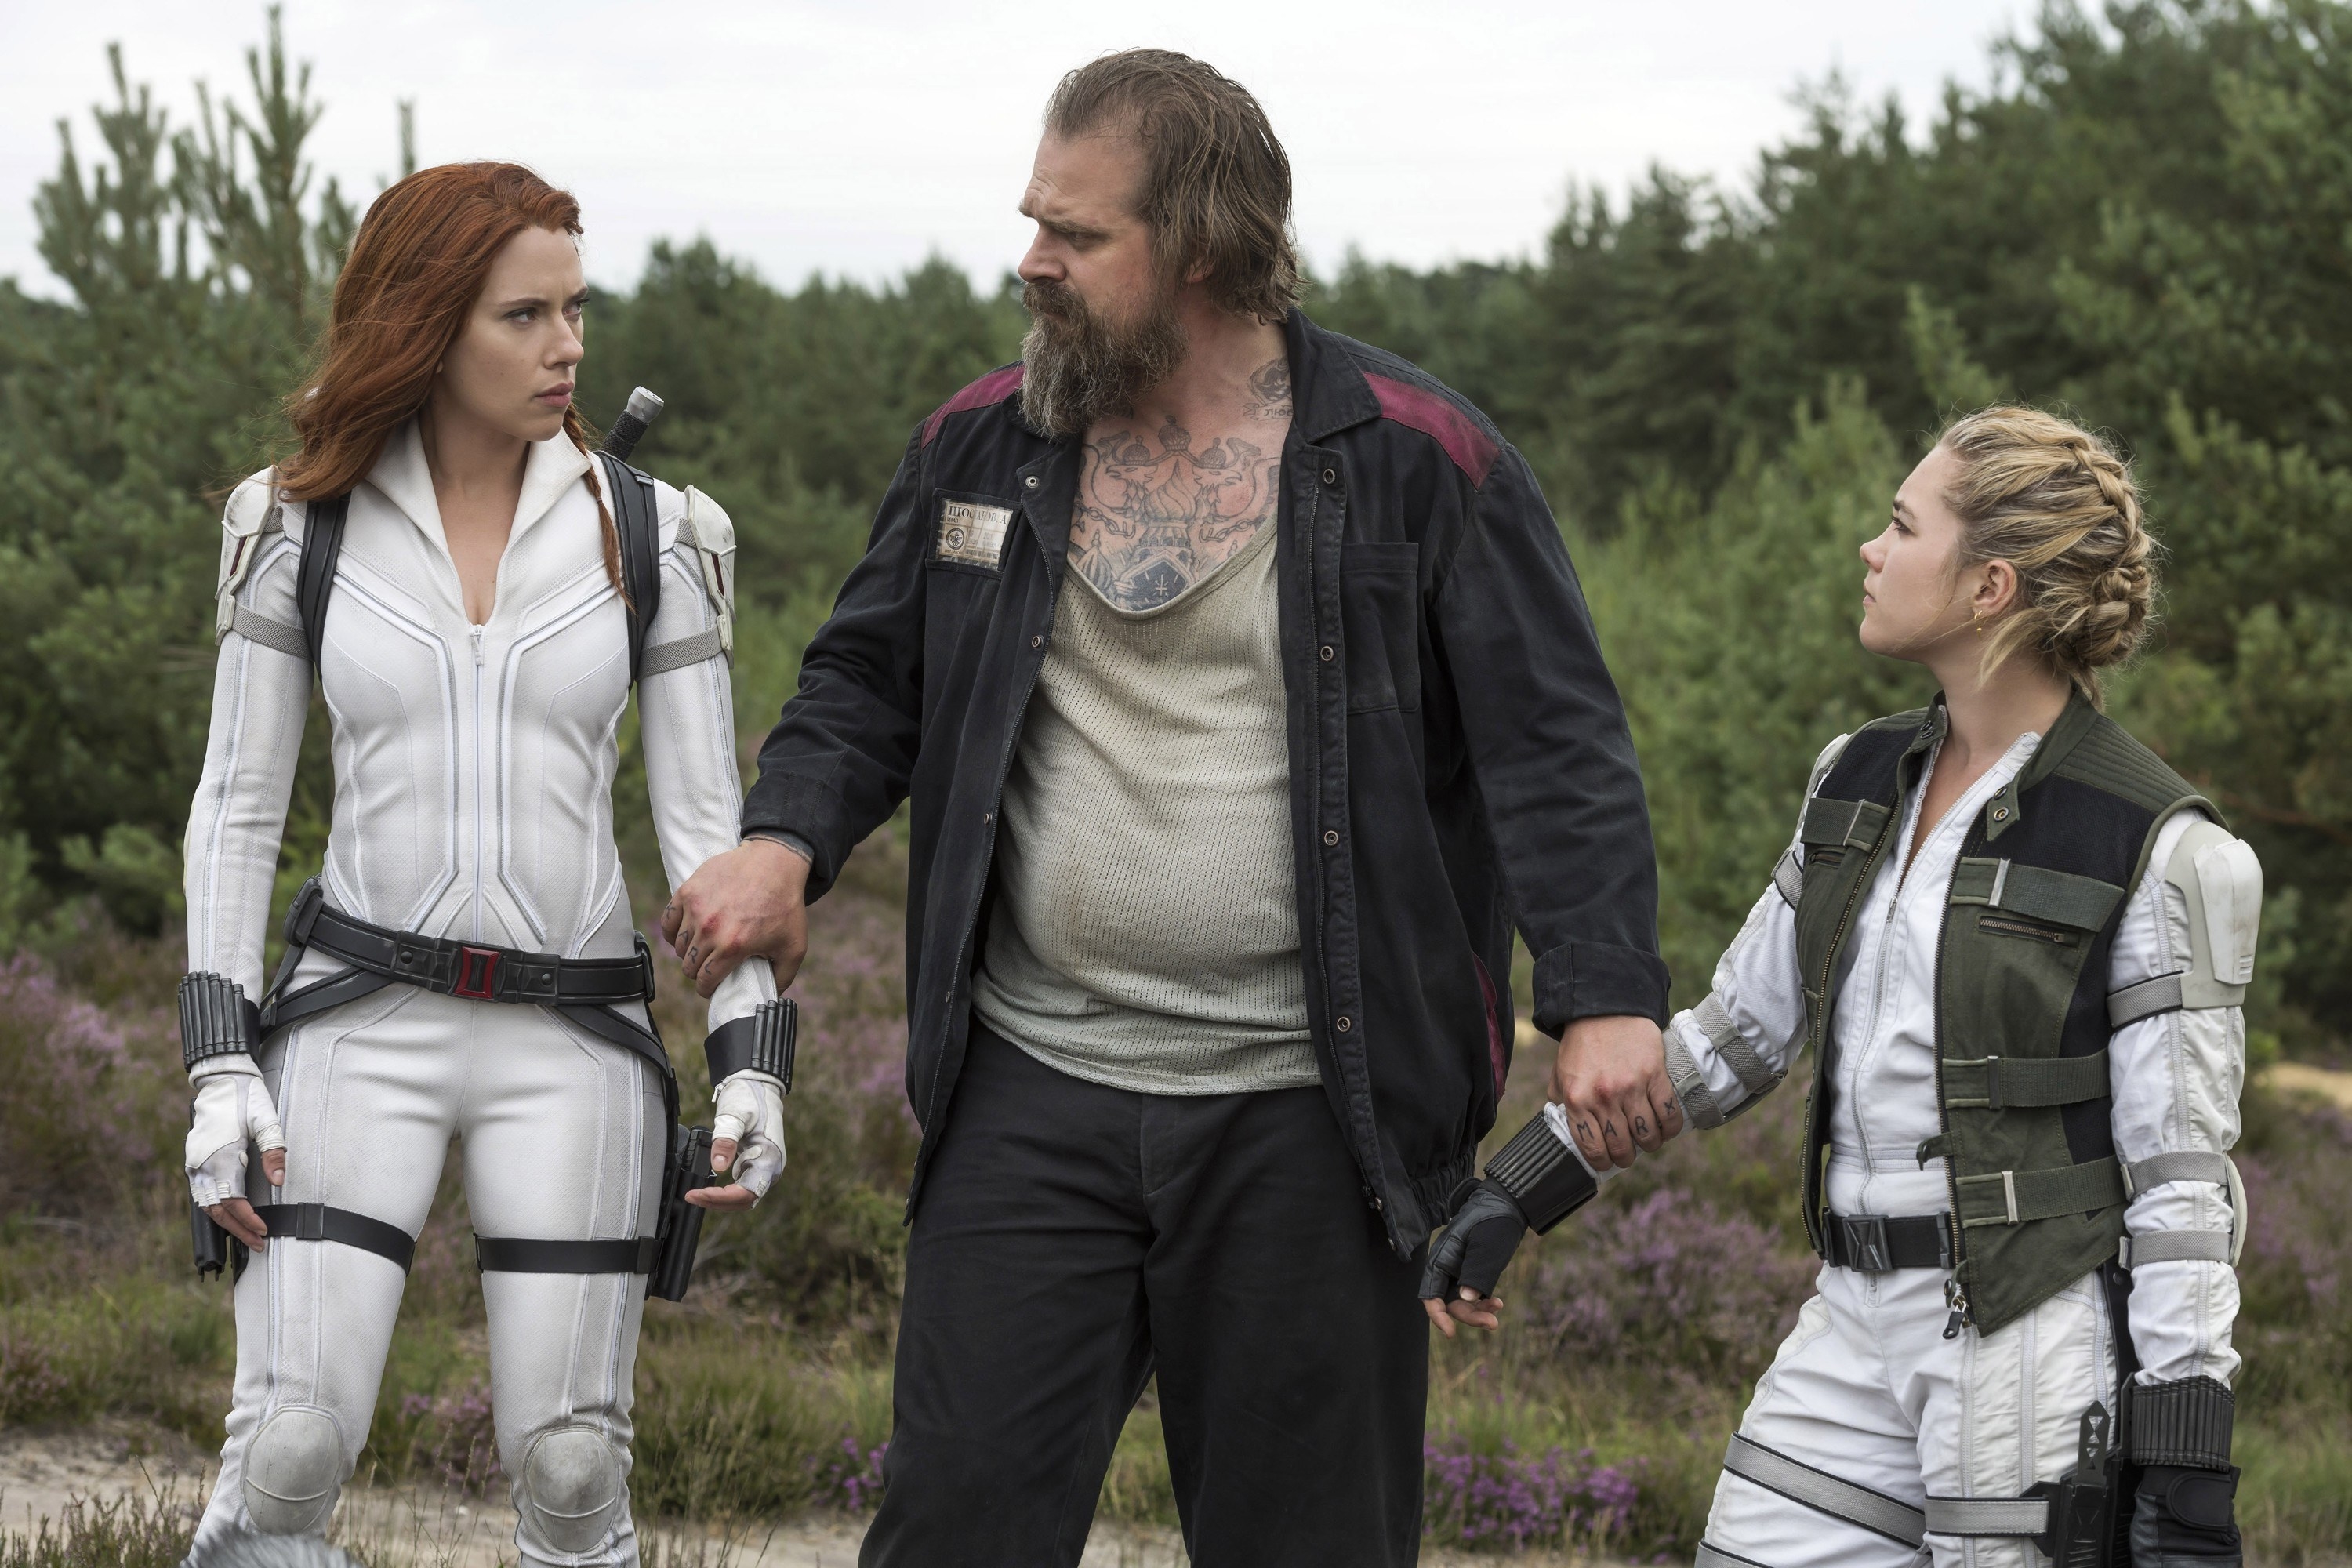 David with Scarlett Johansson and Florence Pugh in a scene from the movie